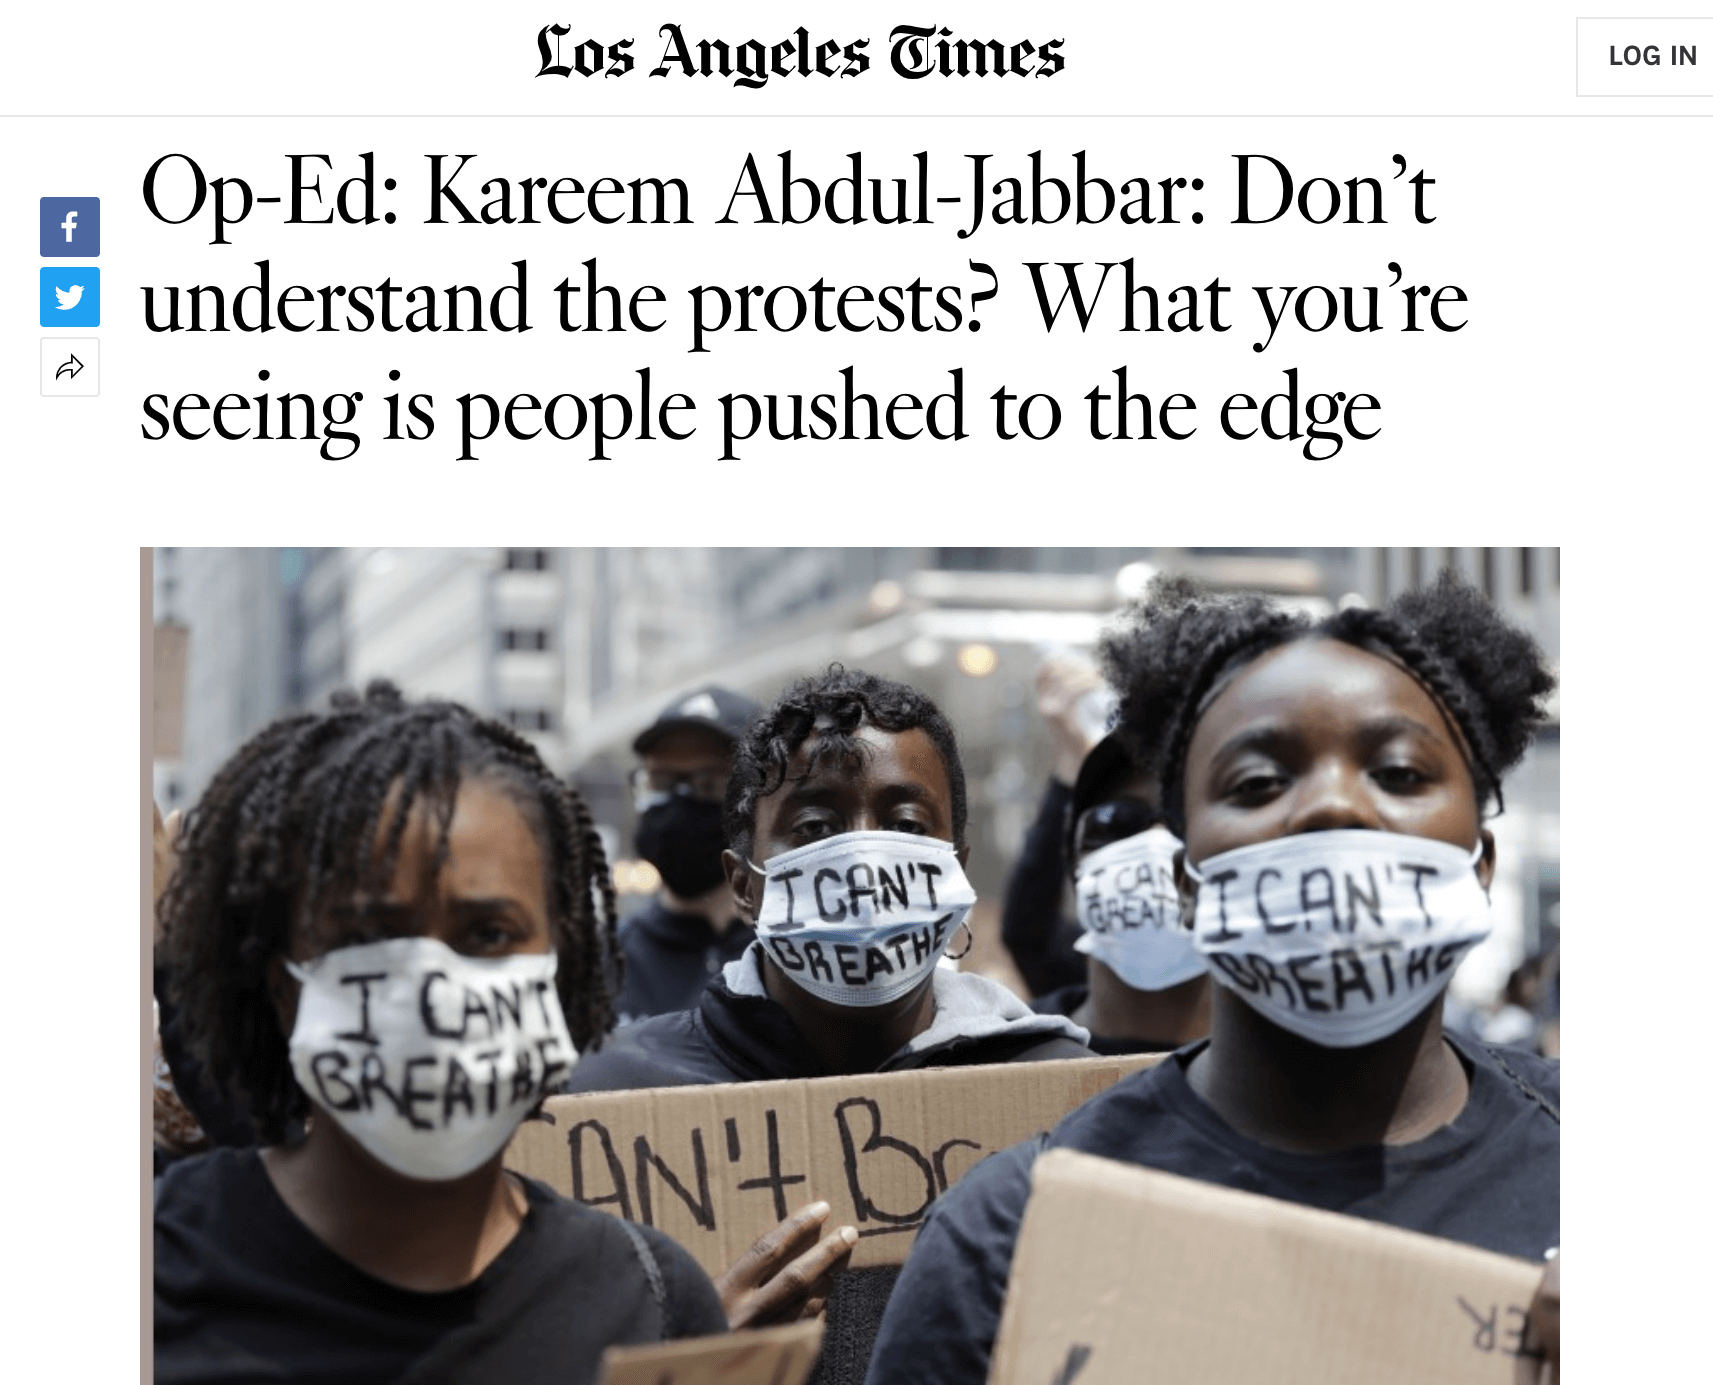 If you don’t understand the protests, read this